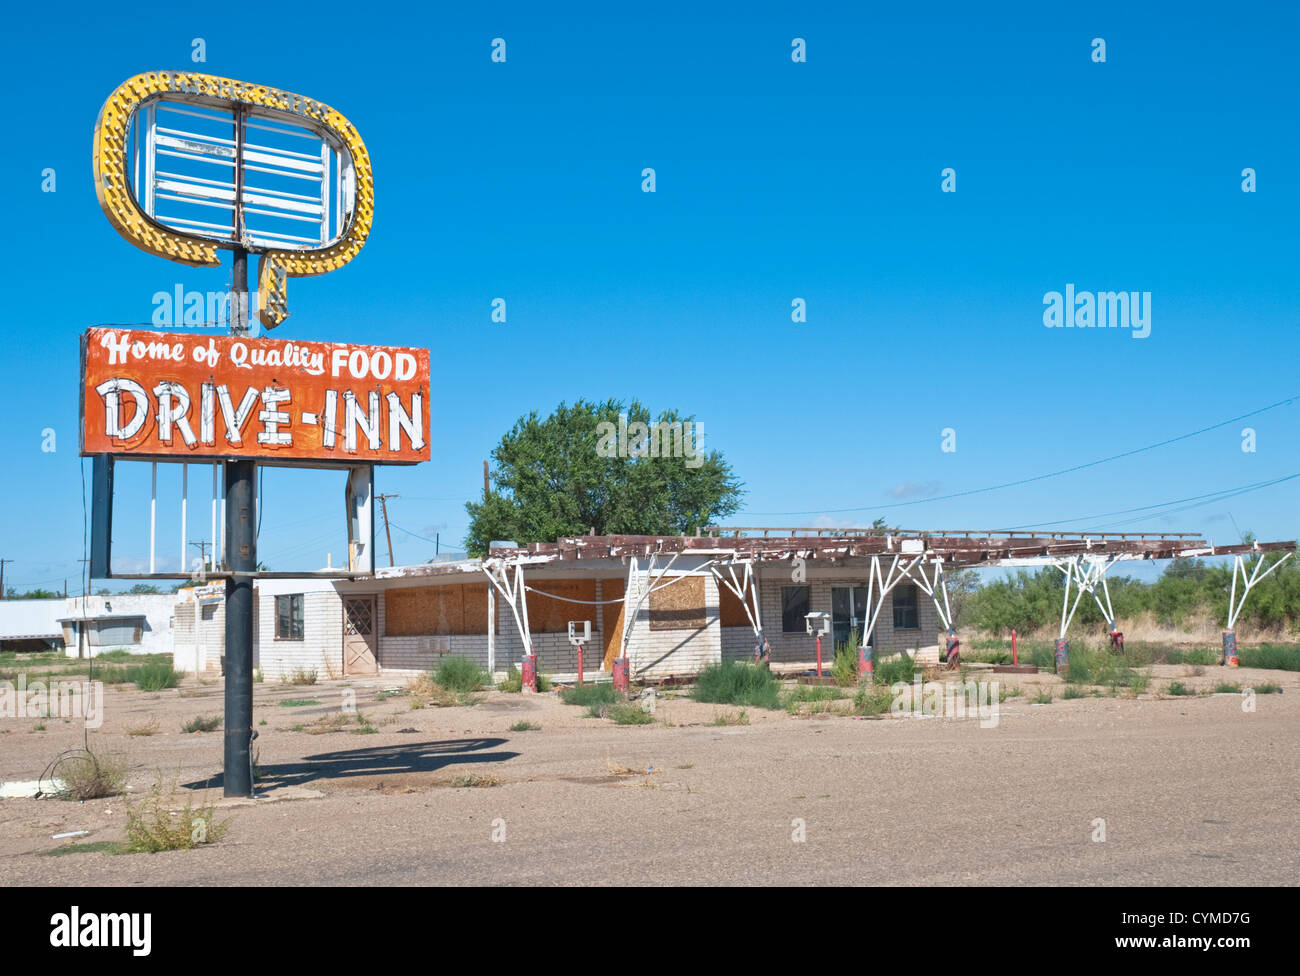 This Drive-inn in Tucumcari has long been abandoned. Stock Photo